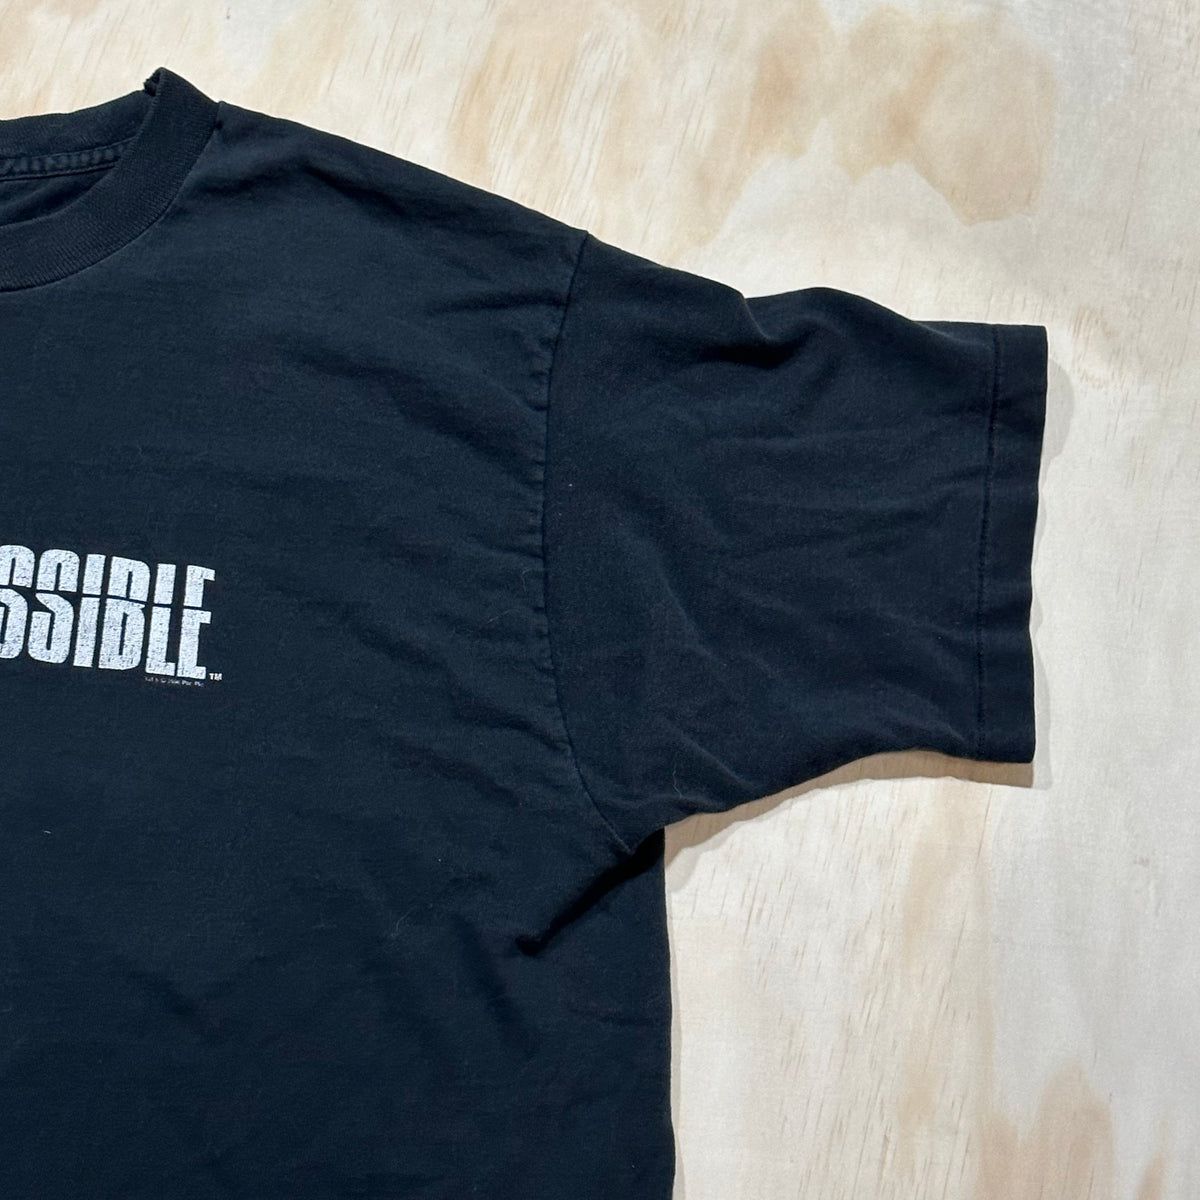 1996 Mission Impossible Tom Cruise movie promo shirt